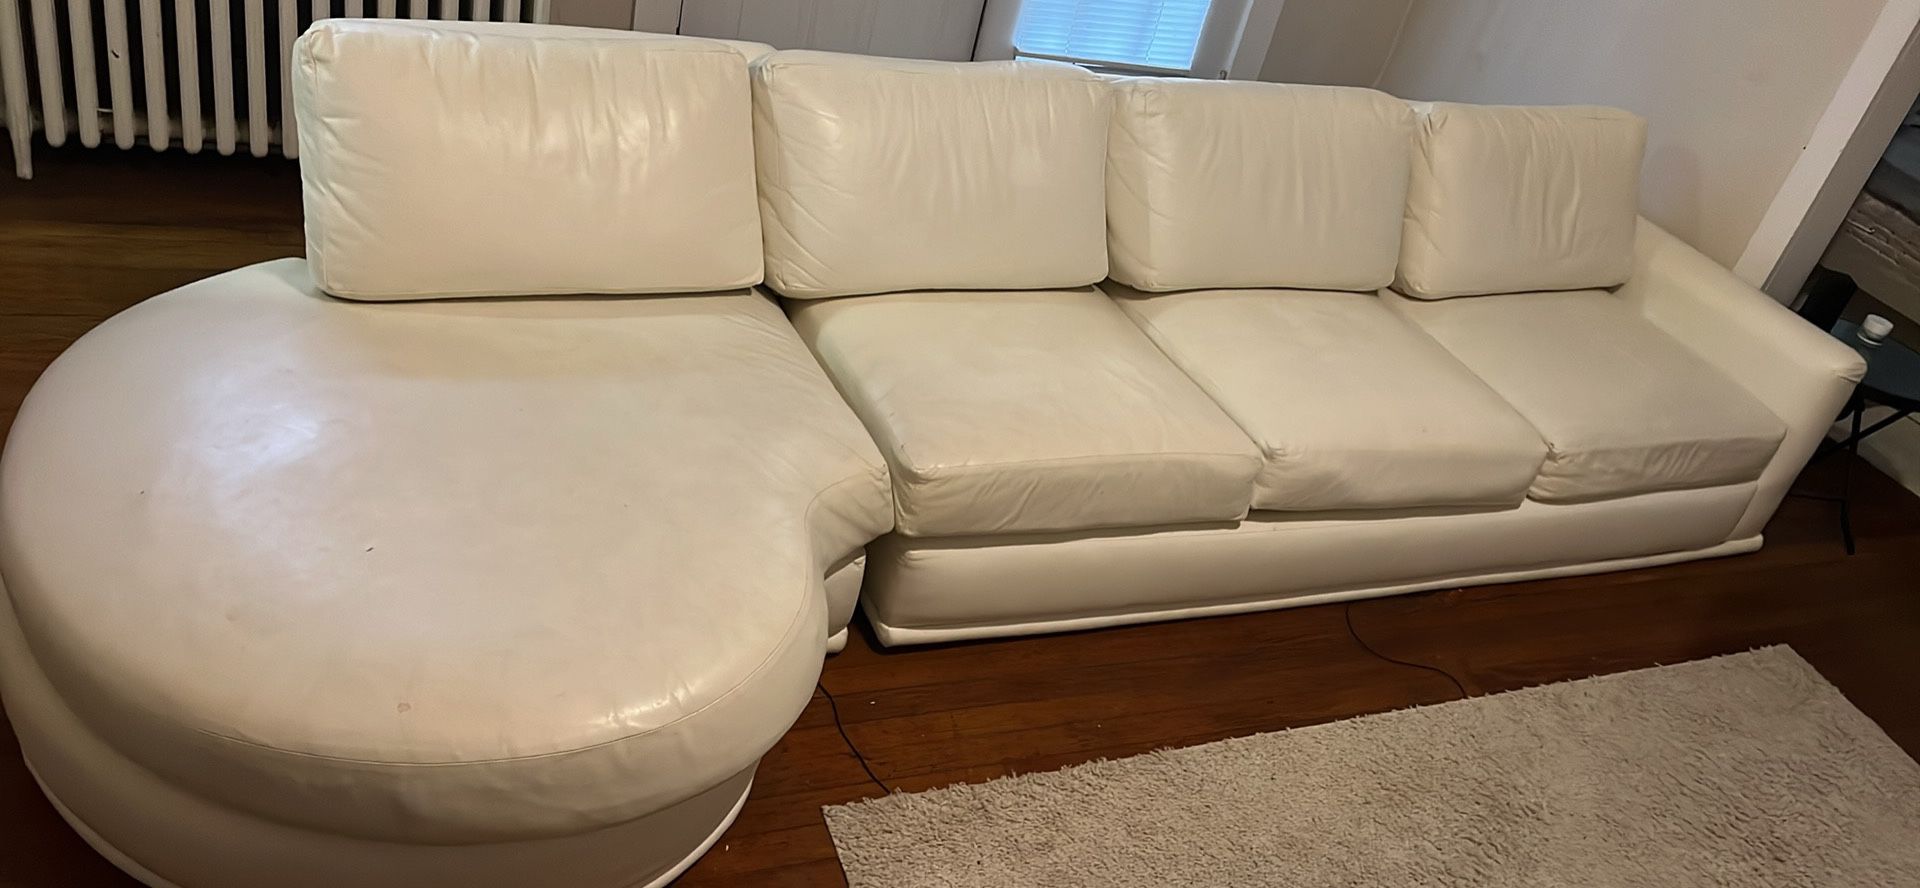 Leather Sofa 11ft Long By 4 Ft Wide 